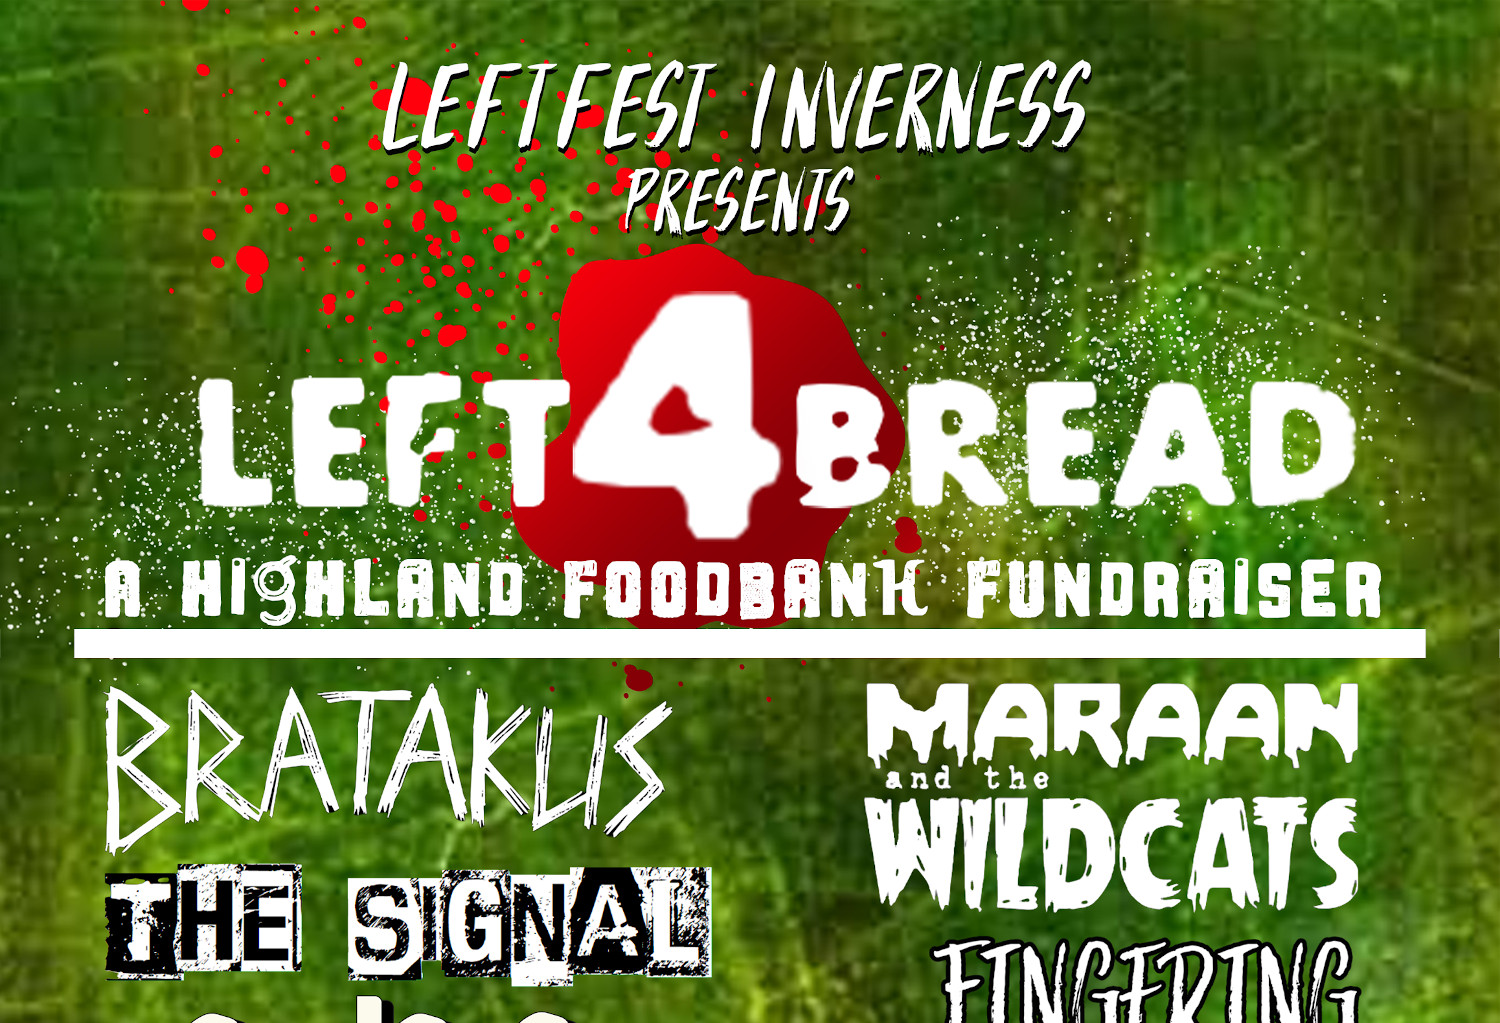 Leftfest returns to Inverness after the pandemic